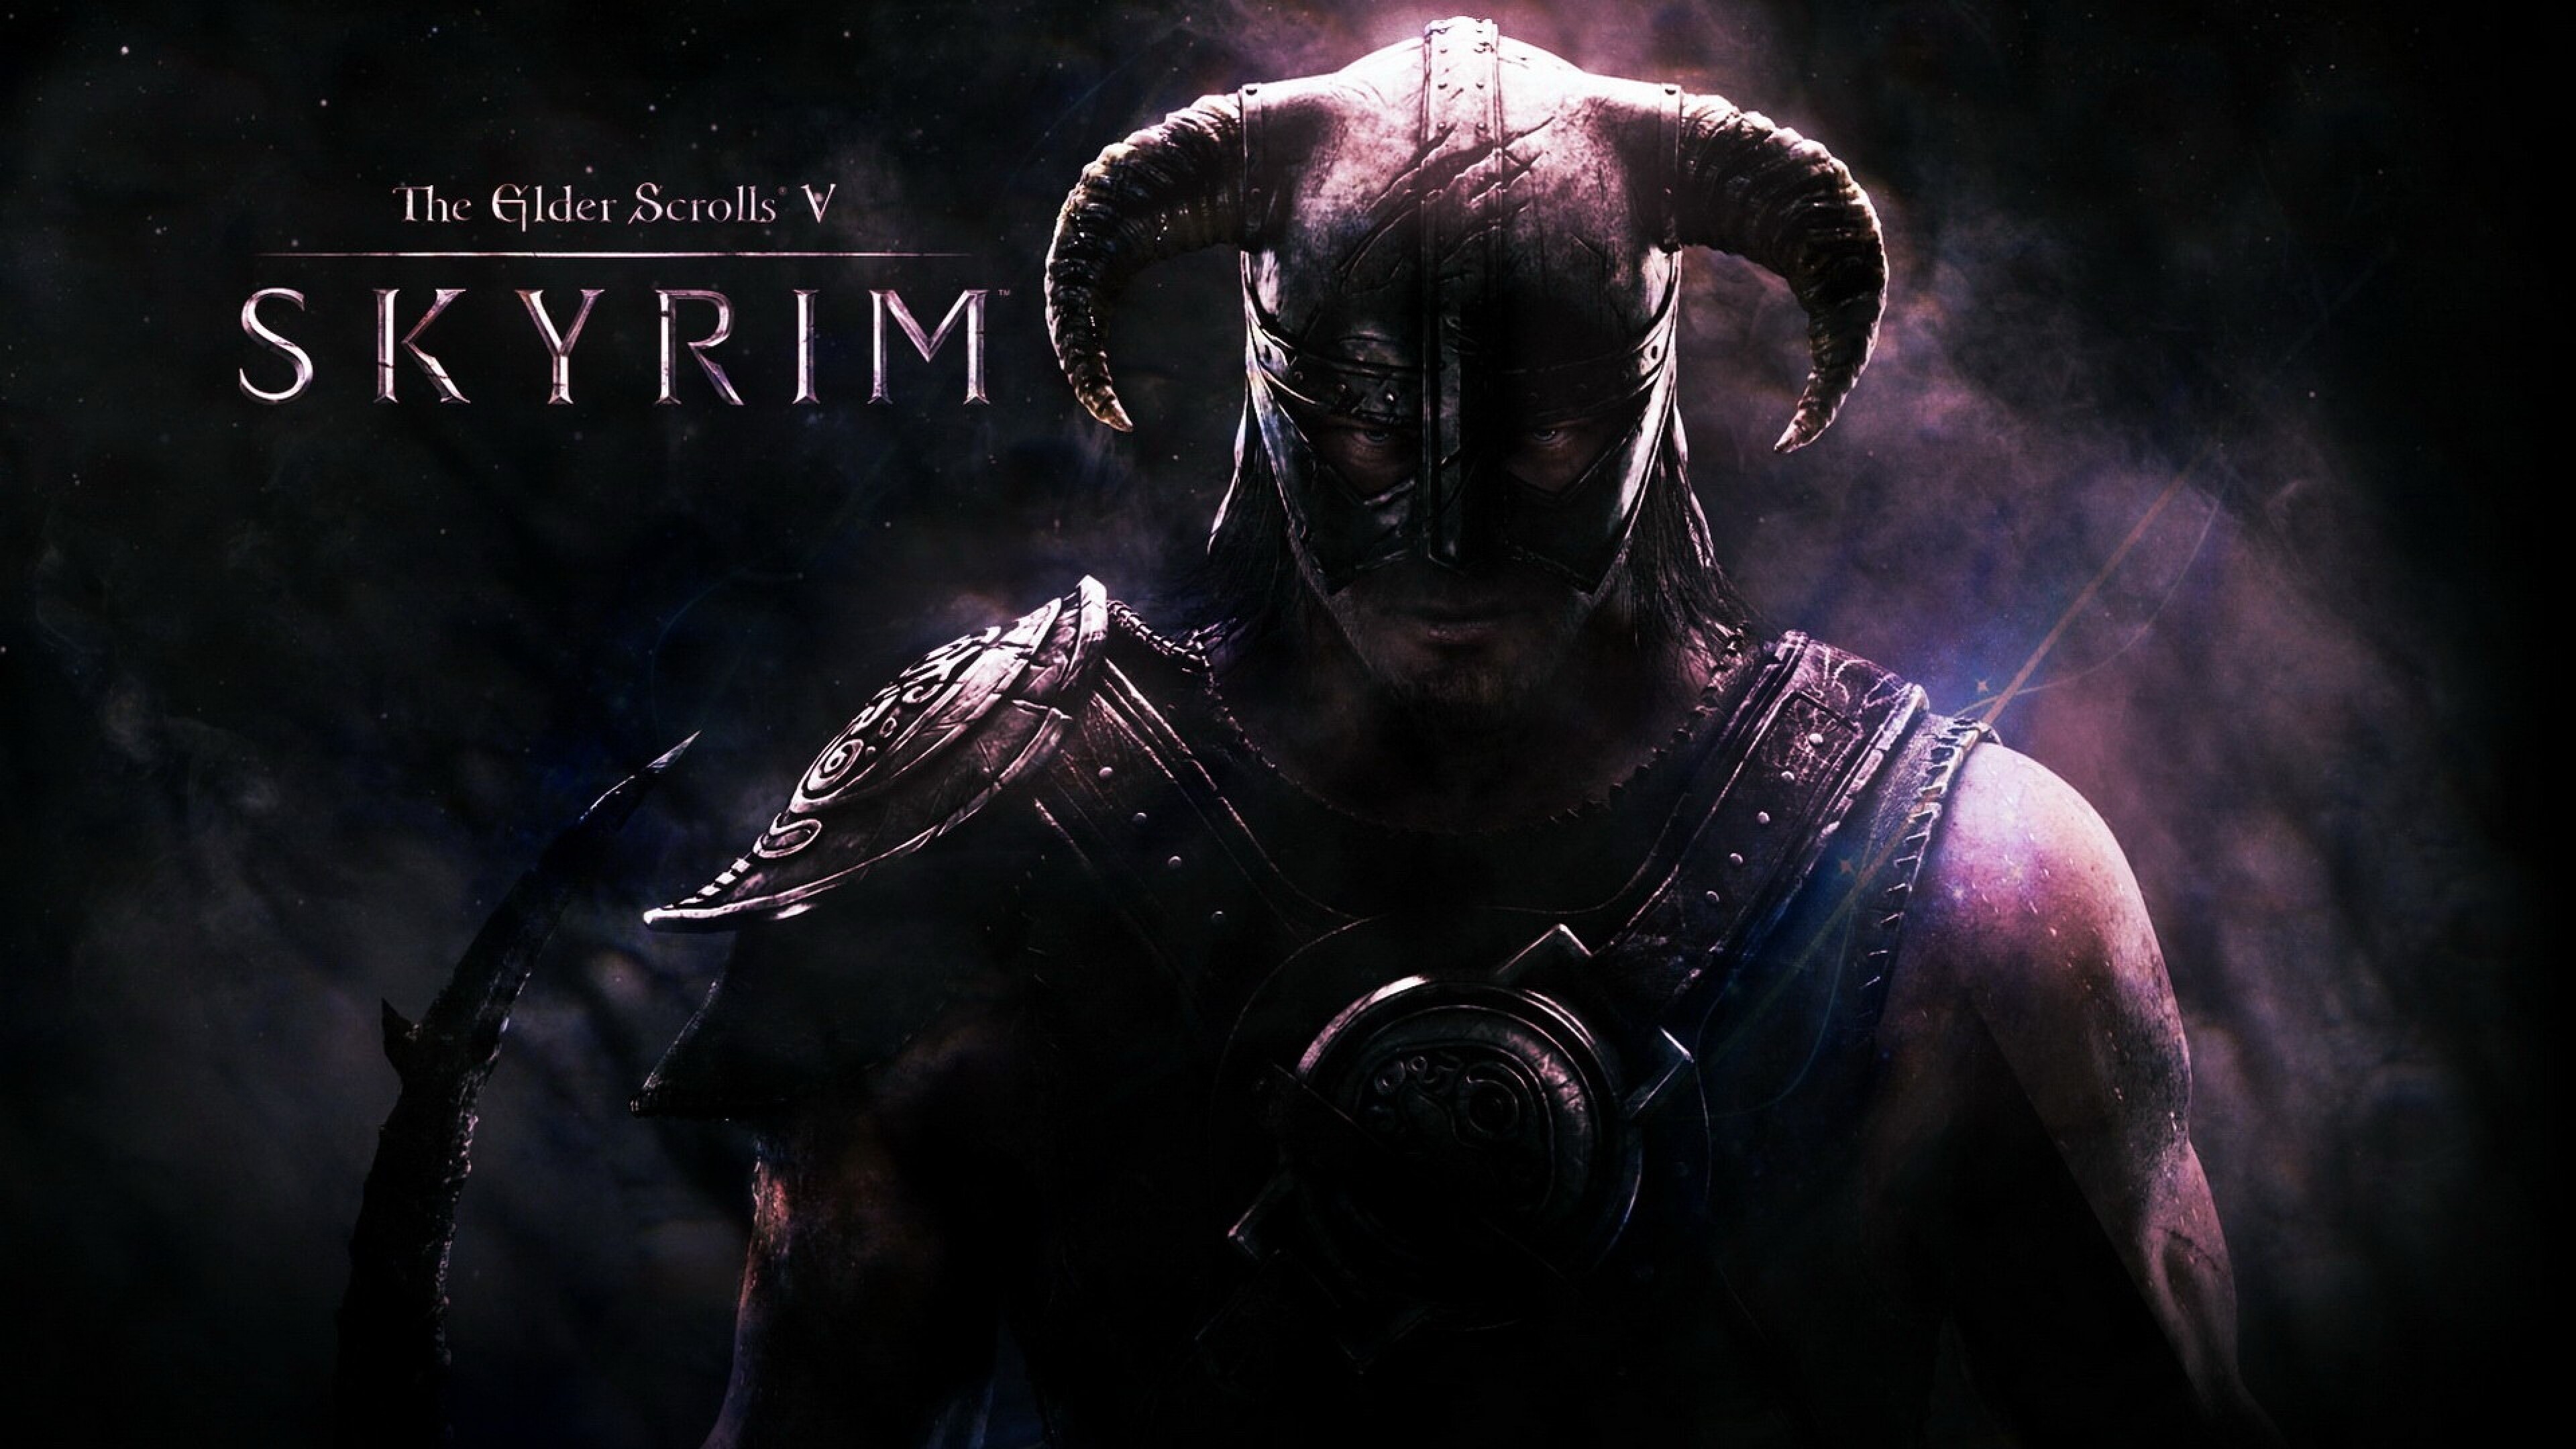 The Elder Scrolls: Skyrim, An action role-playing video game developed by Bethesda Game Studios. 3840x2160 4K Wallpaper.